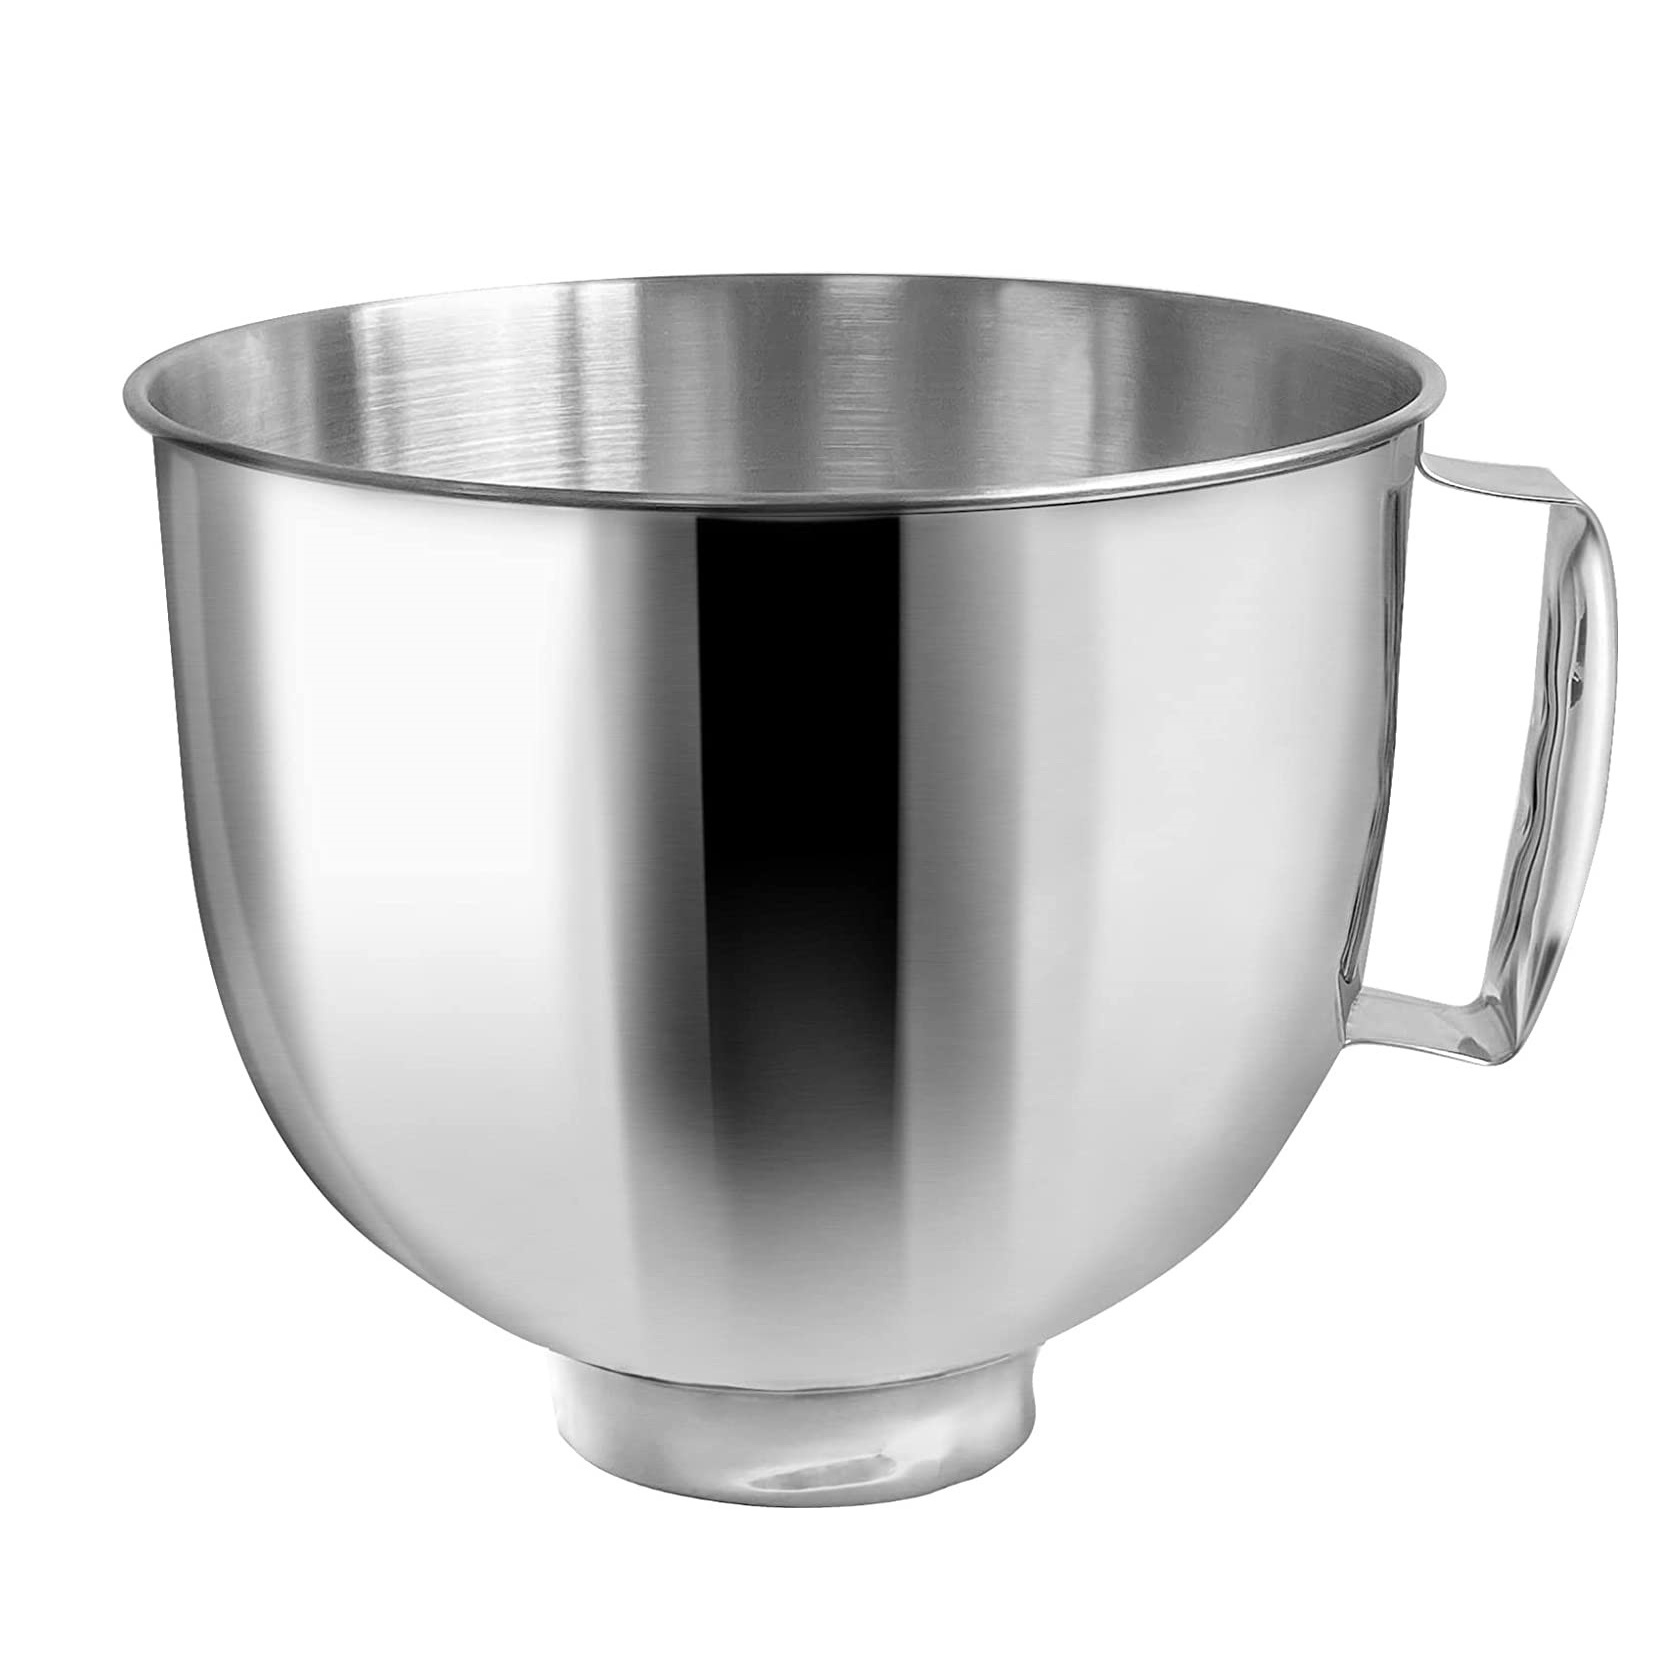 KITCHEN AID #KSM150 Replacement Stainless Steel Bowl with Handle 4.5 QT.